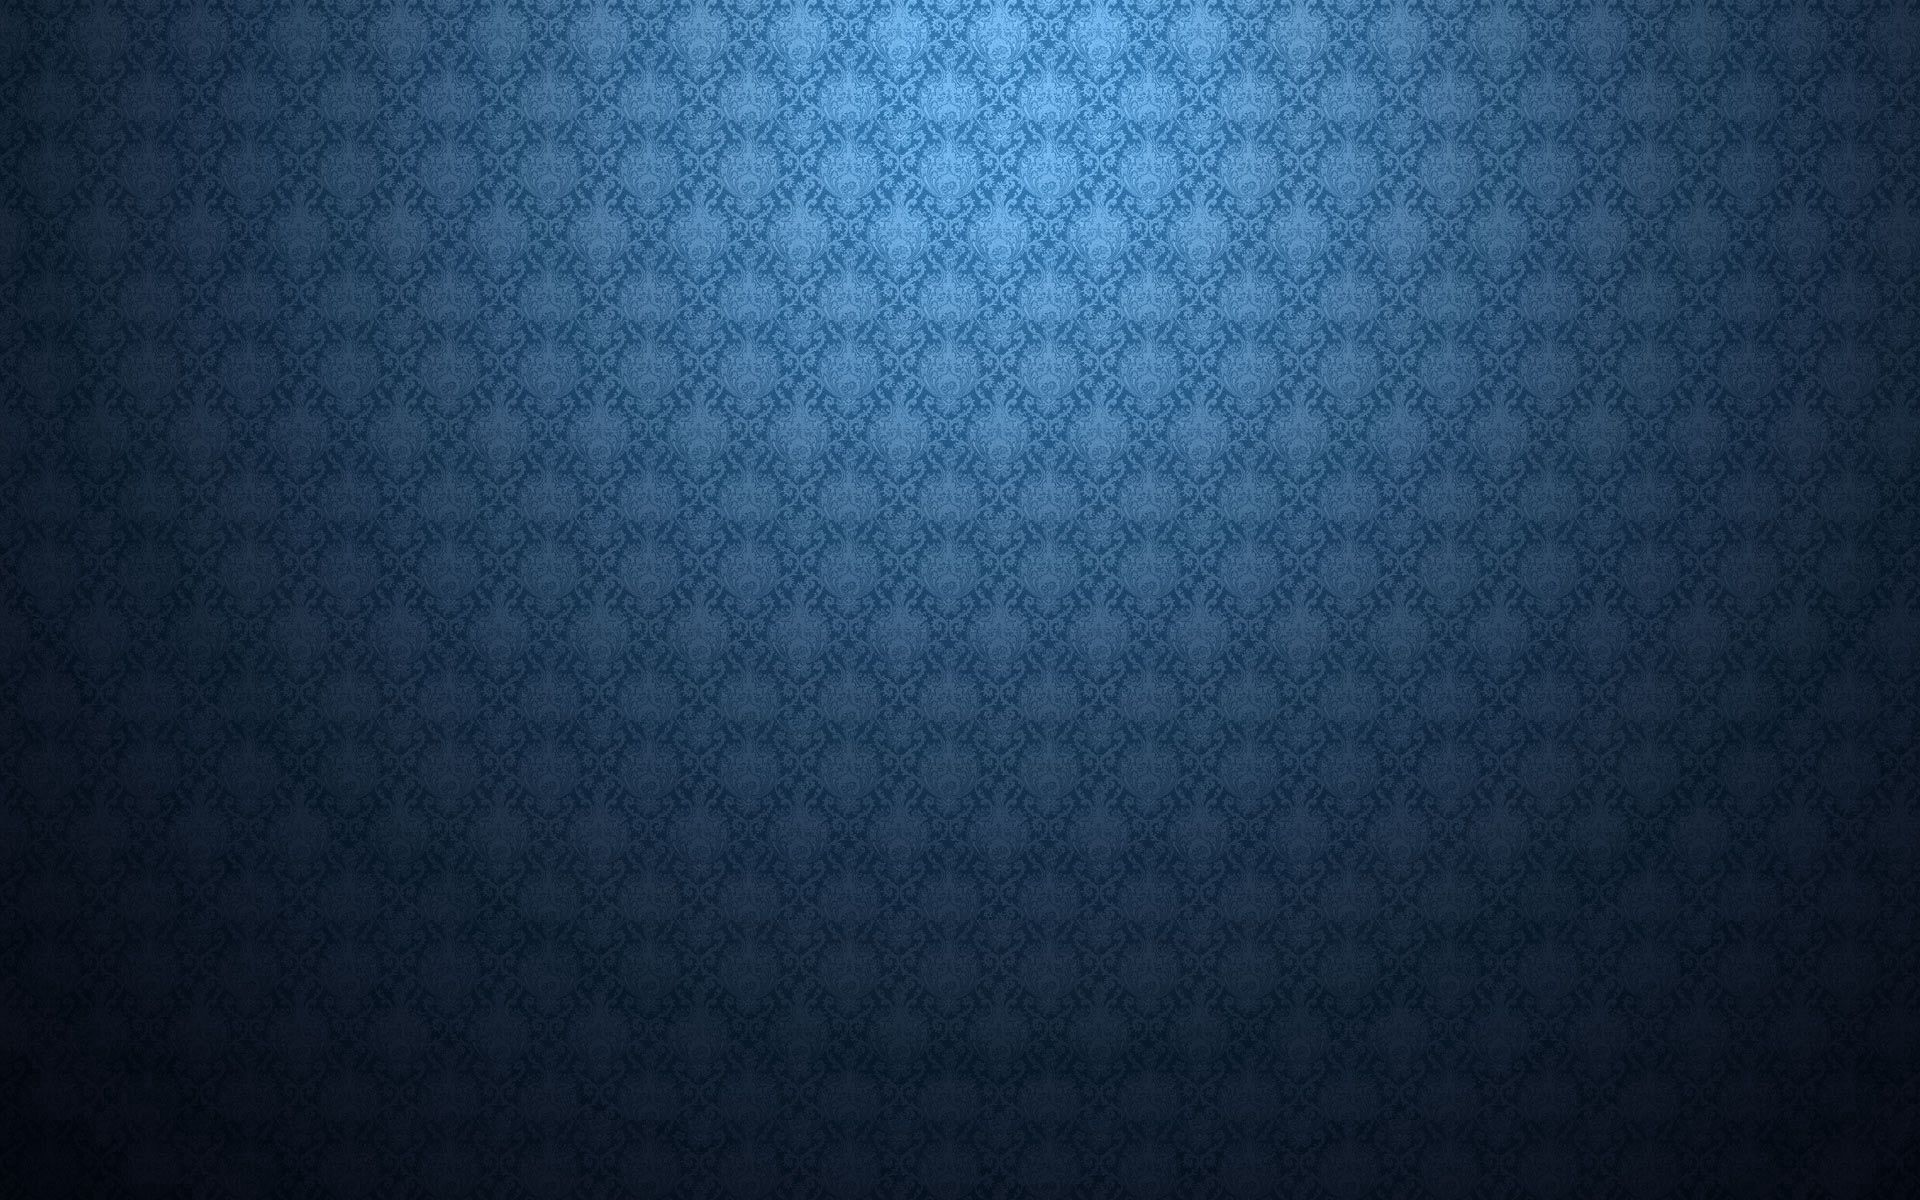 114429 download wallpaper textures, patterns, shine, light, texture, surface, shadow screensavers and pictures for free